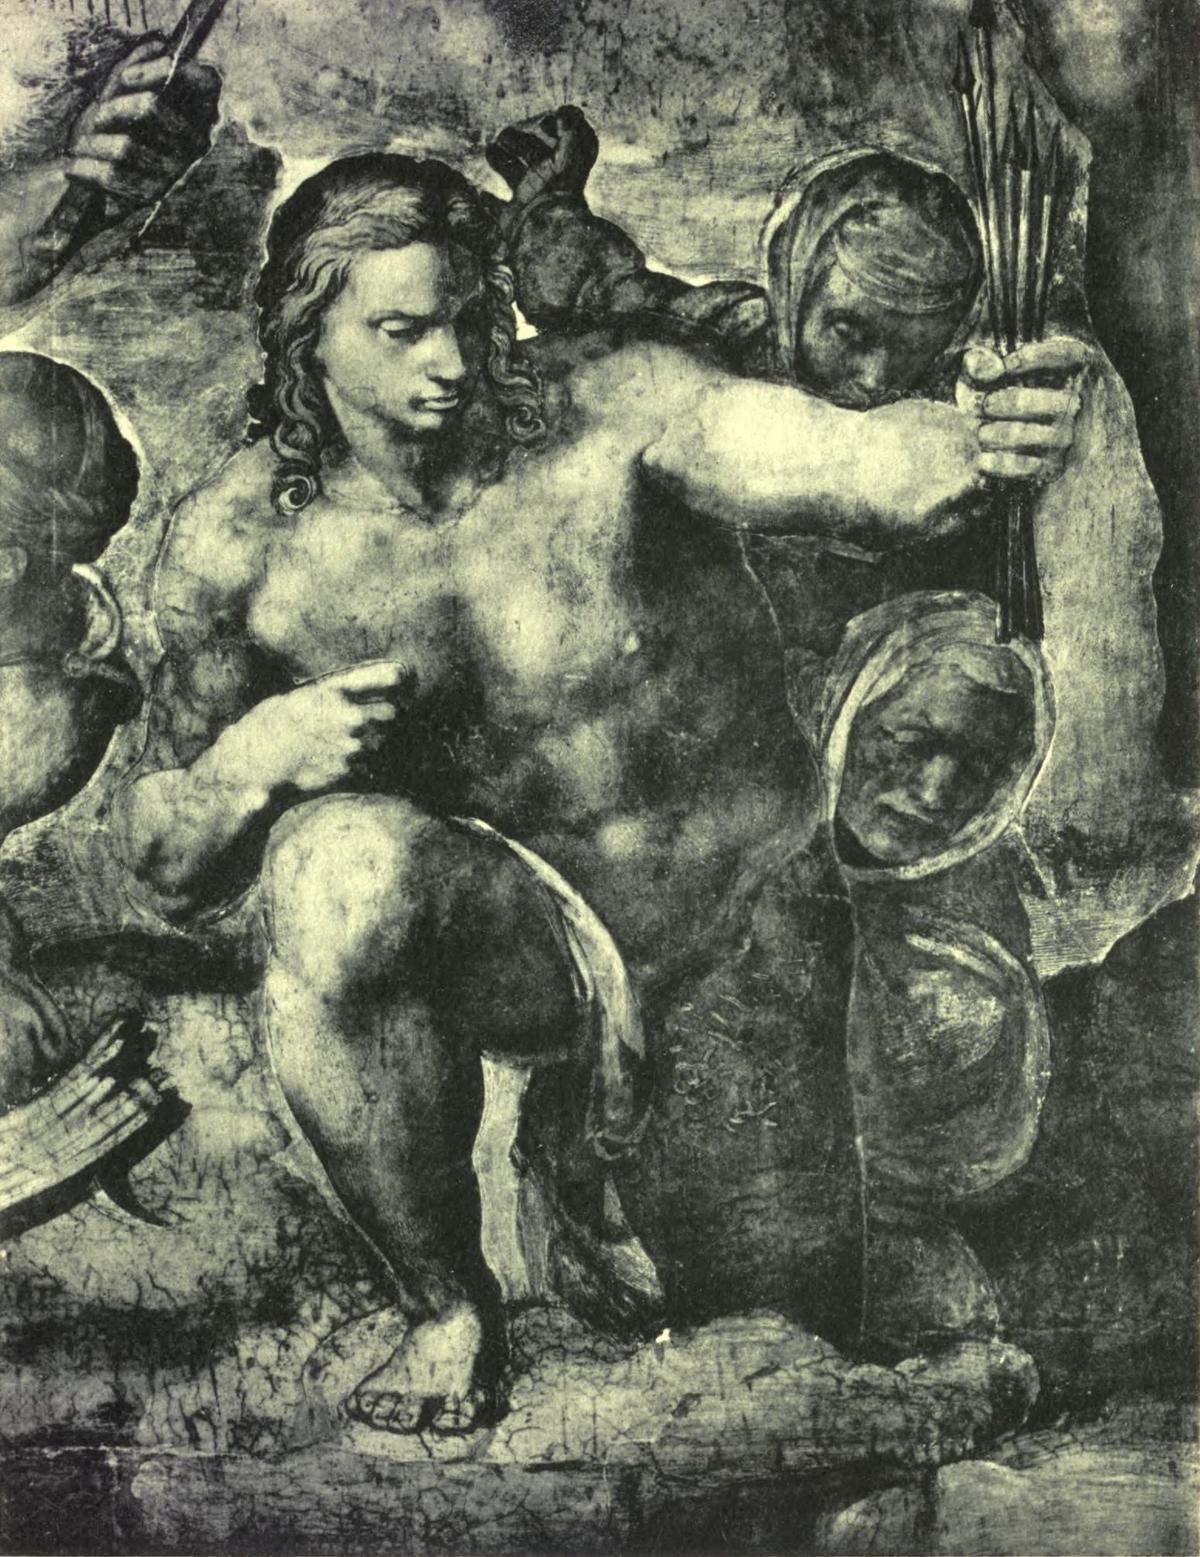 S. SEBASTIAN (After the fresco by Michelangelo . Rome: The Vatican, Sistine Chapel) Anderson